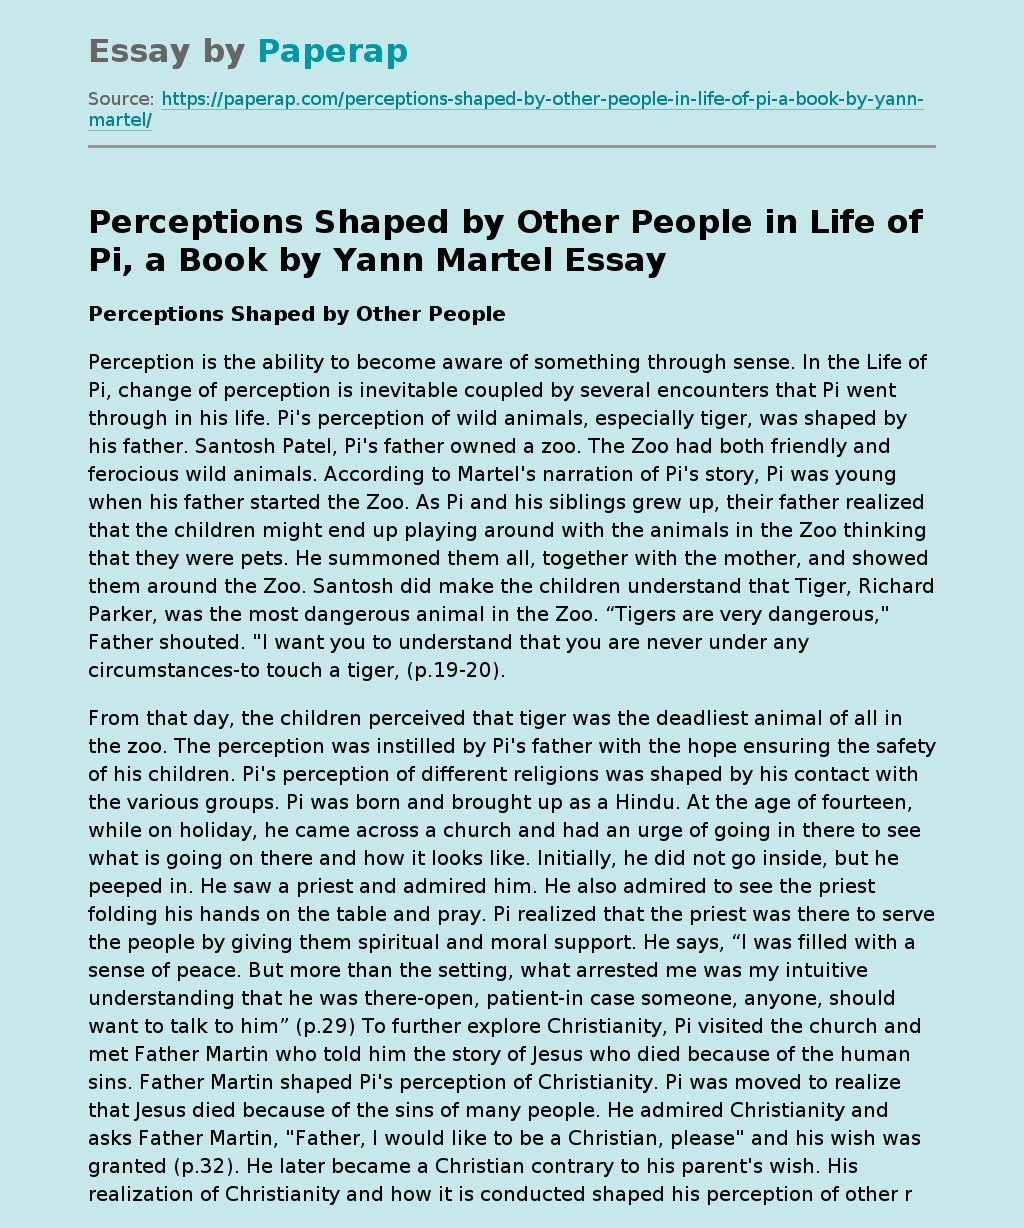 Perceptions Shaped by Other People in Life of Pi, a Book by Yann Martel